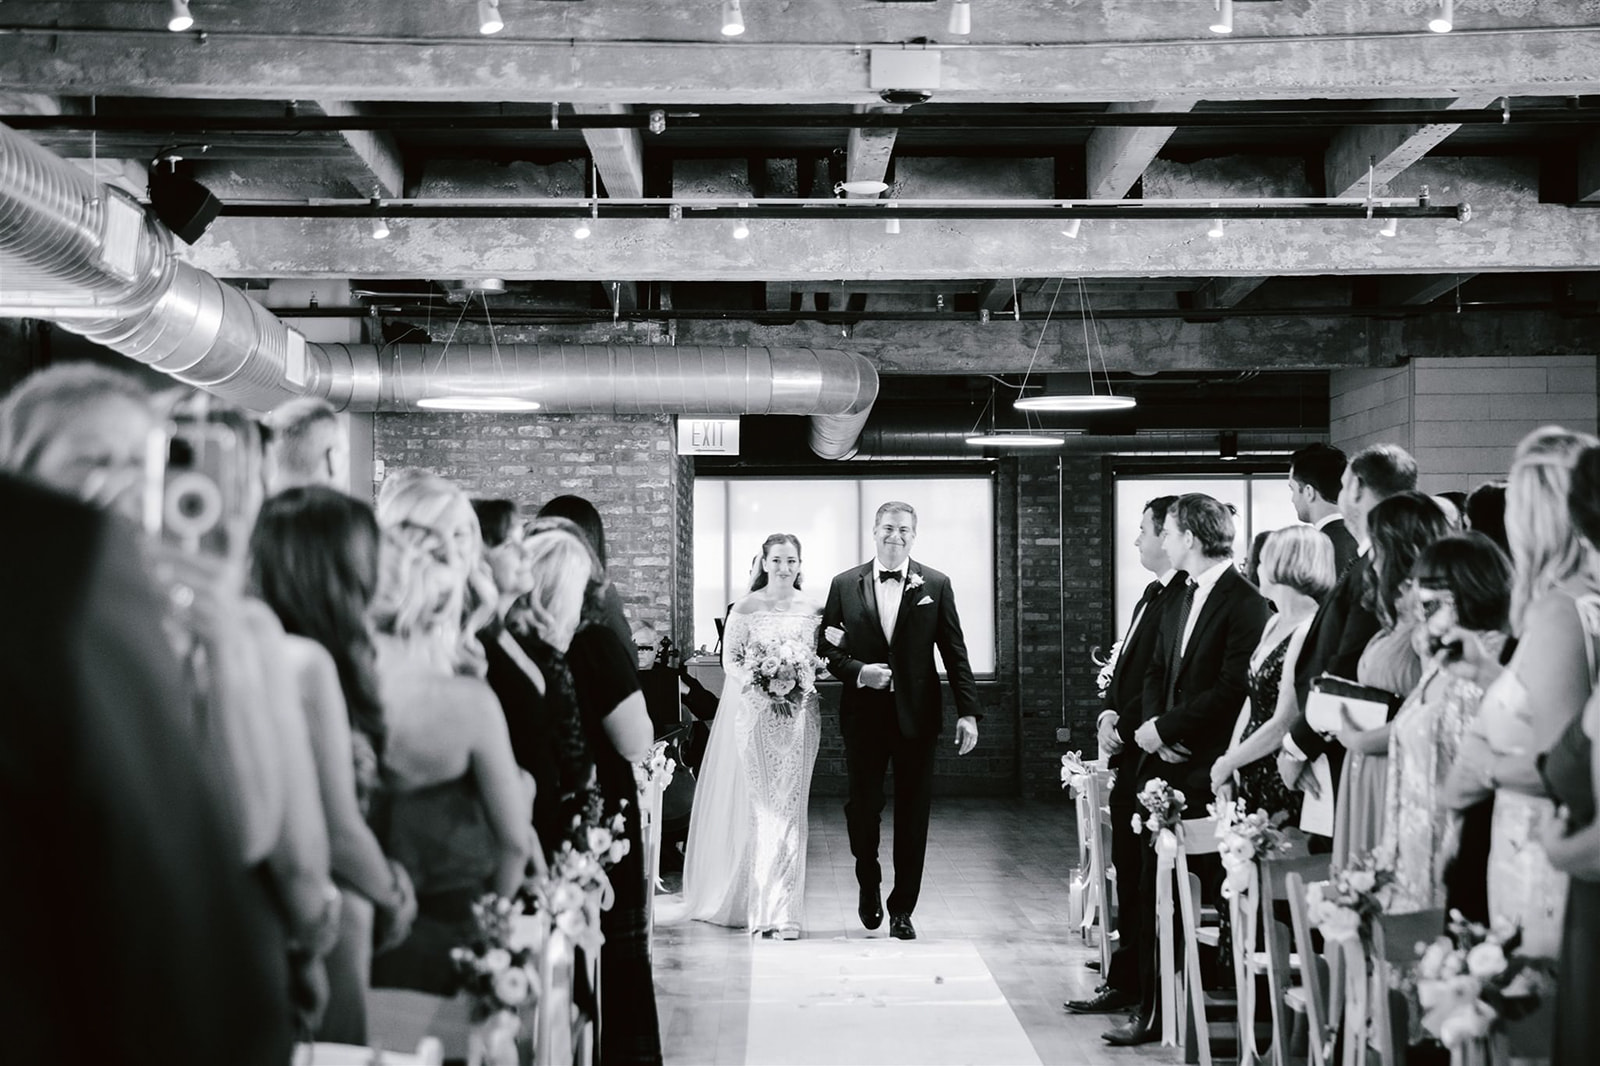 The bride's emotional walk down the aisle, accompanied by her proud father at Walden Chicago.